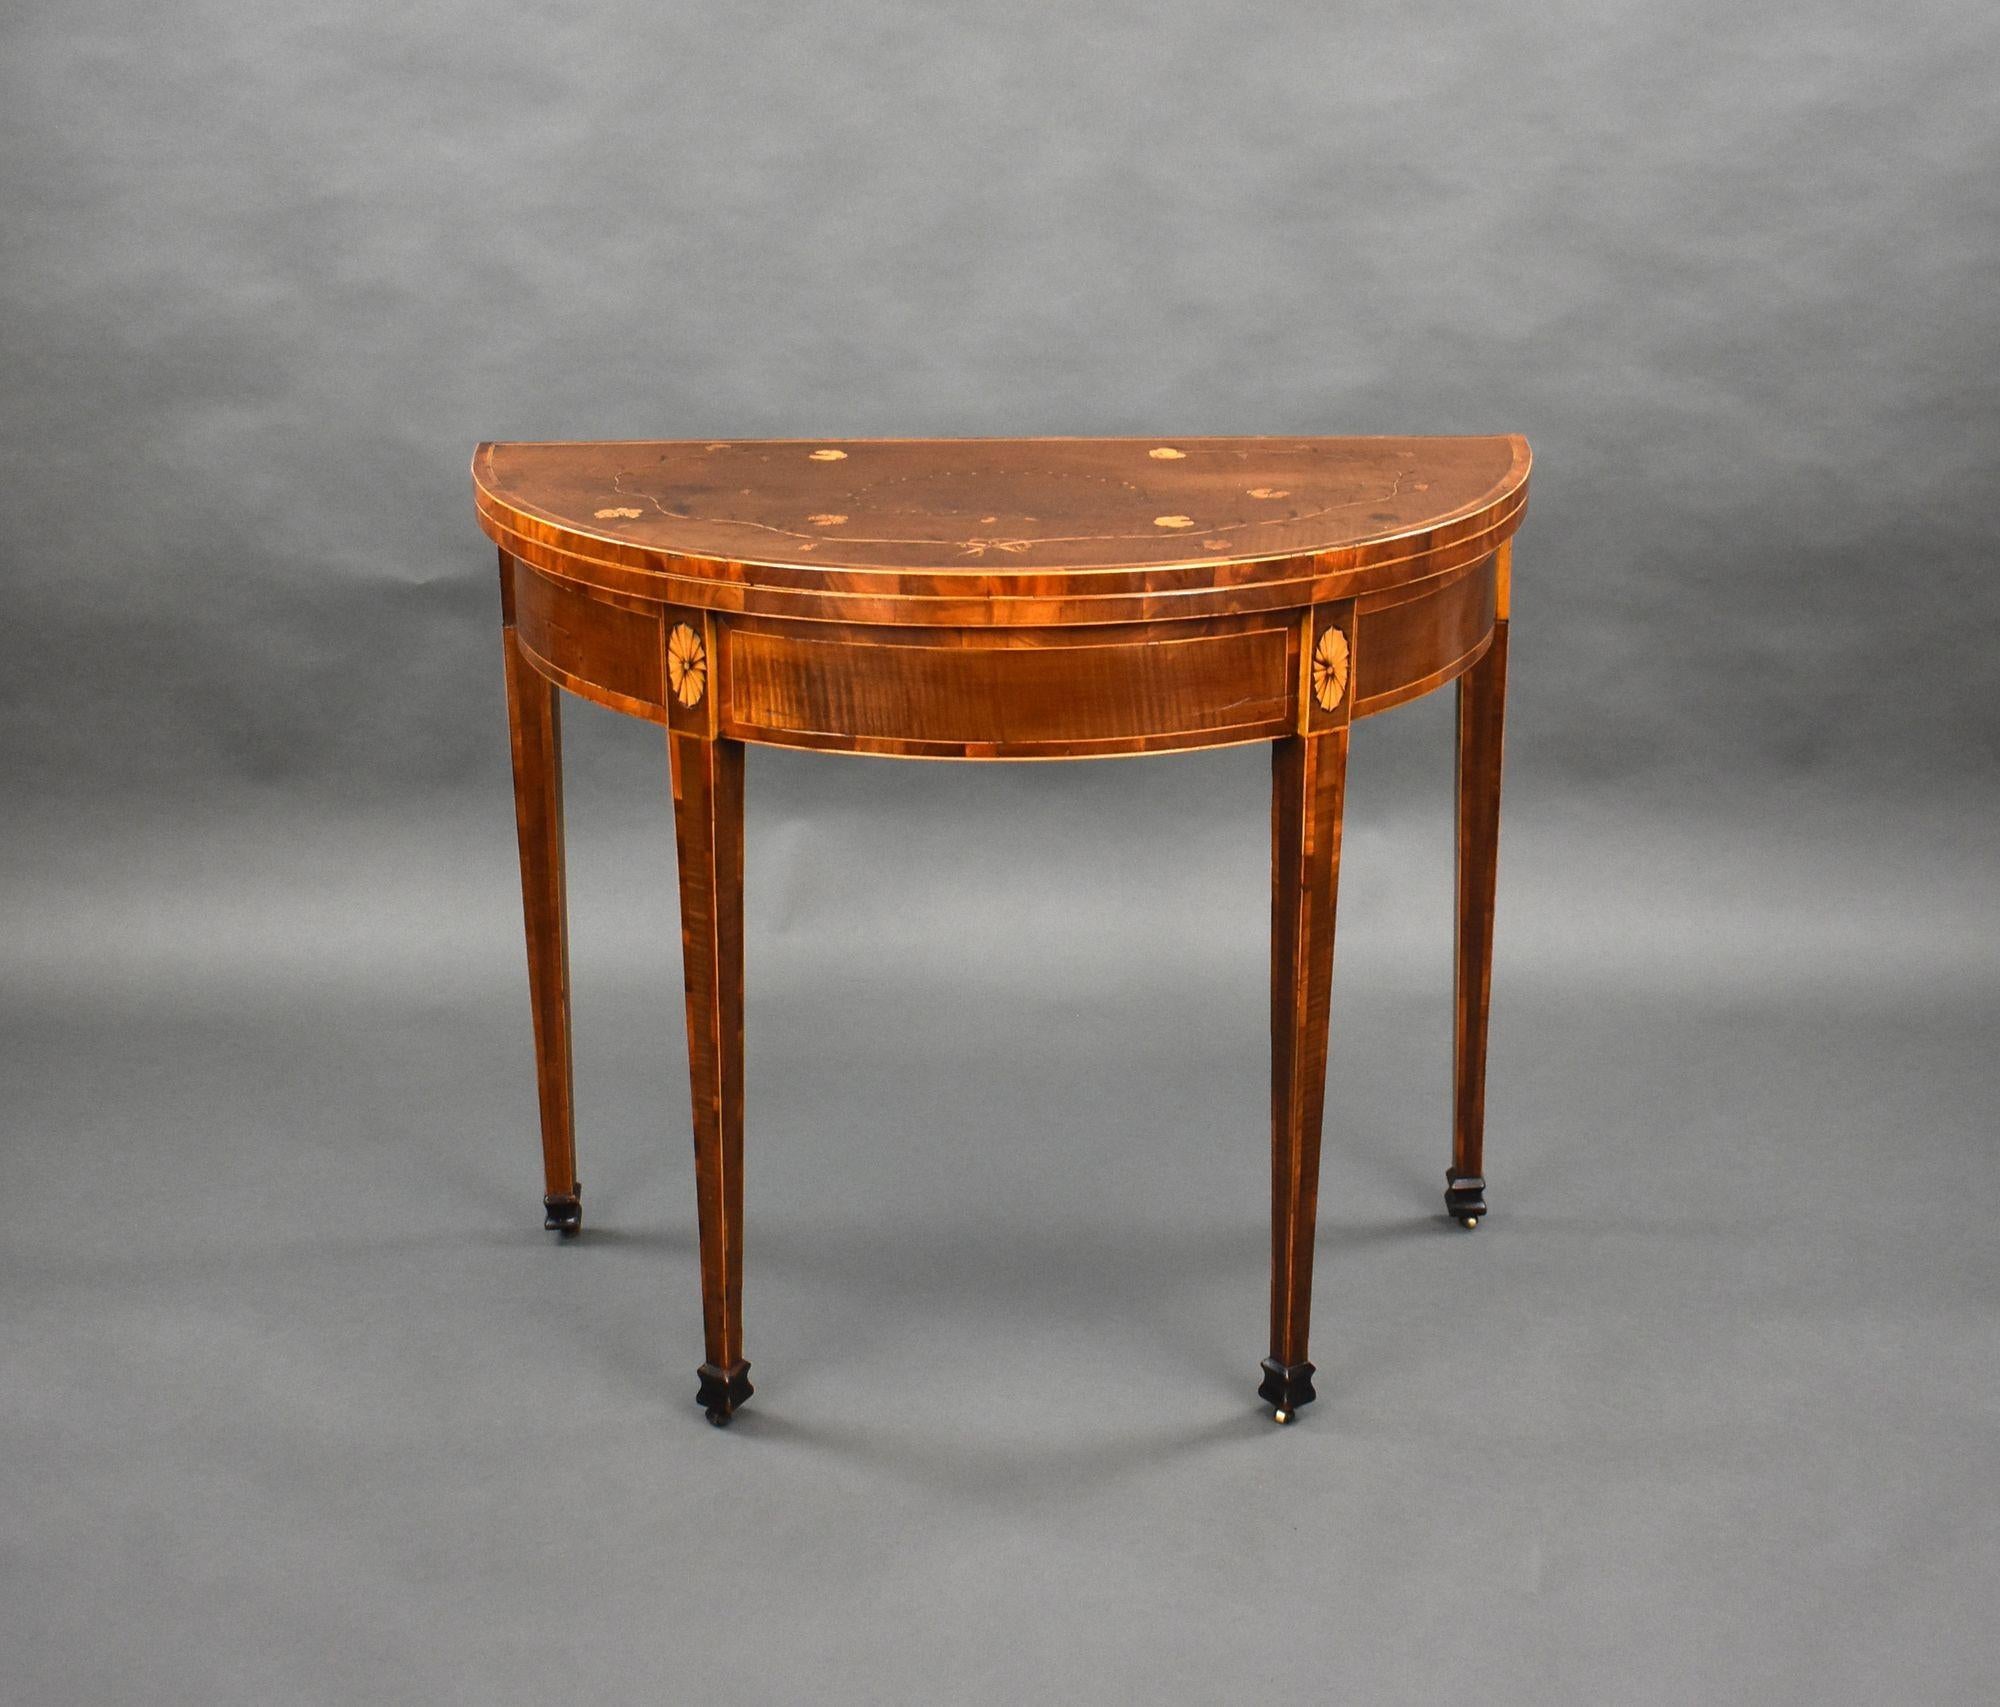 For sale is a good quality 18th century American federal mahogany inlaid card table, the half round top intricately inlaid, supported by a gateleg to the rear, opening to a baise lined interior. The table stands on elegant tapered legs terminating